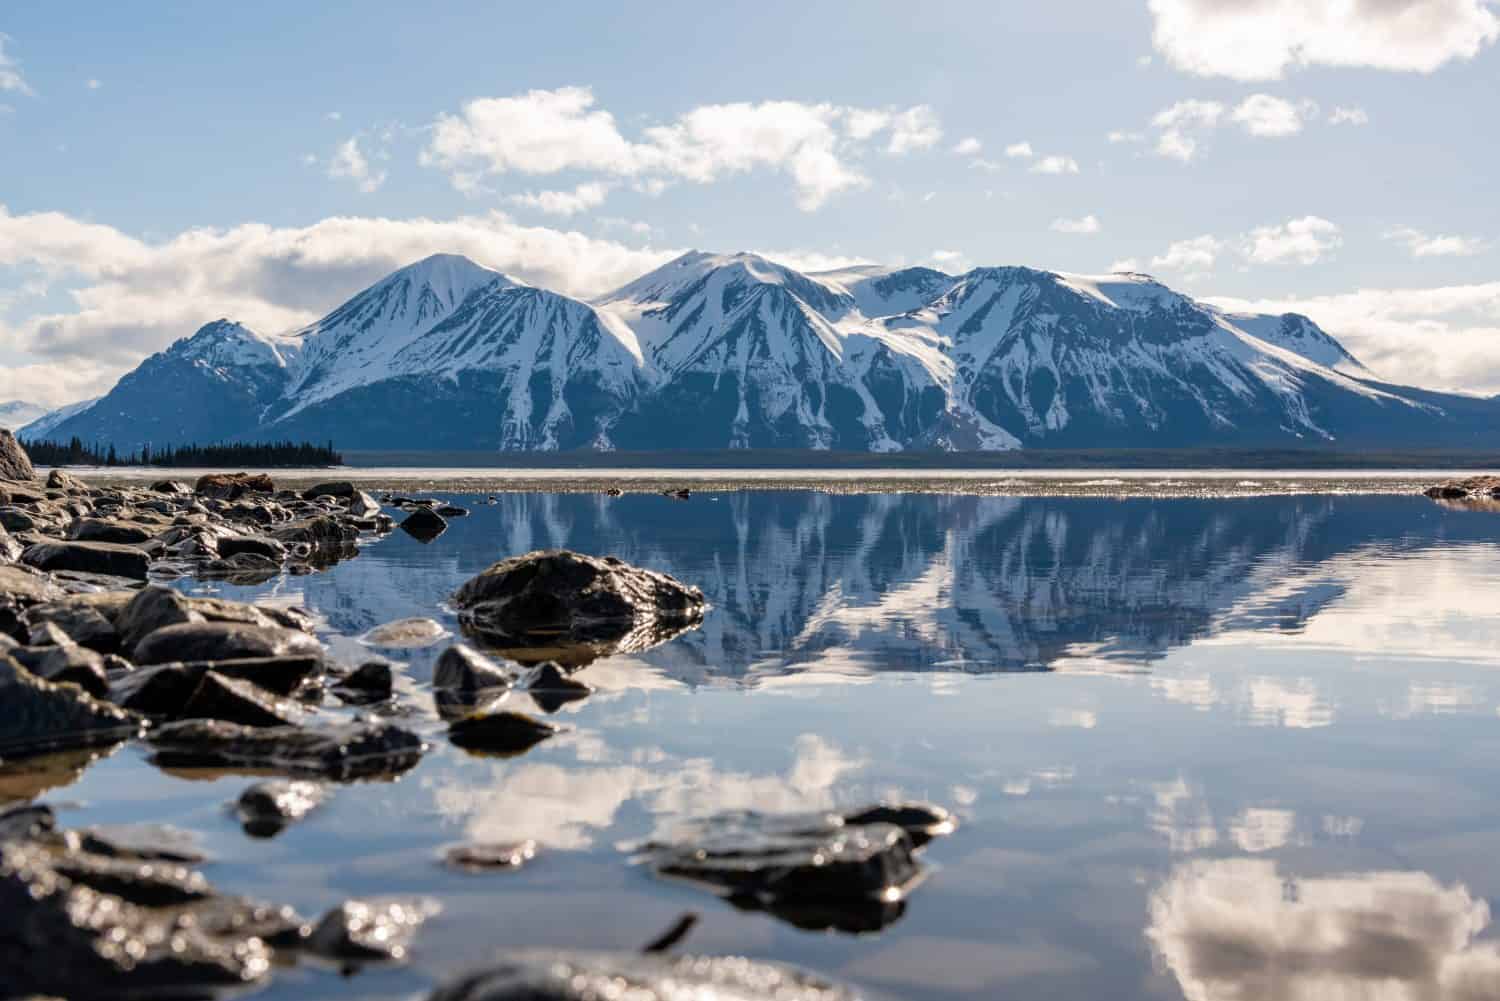 Stunning view of the Atlin Mountains in northern British Columbia during spring time on perfect blue sky day with clouds and reflection in calm water below. Scenic, view for home, office art. 